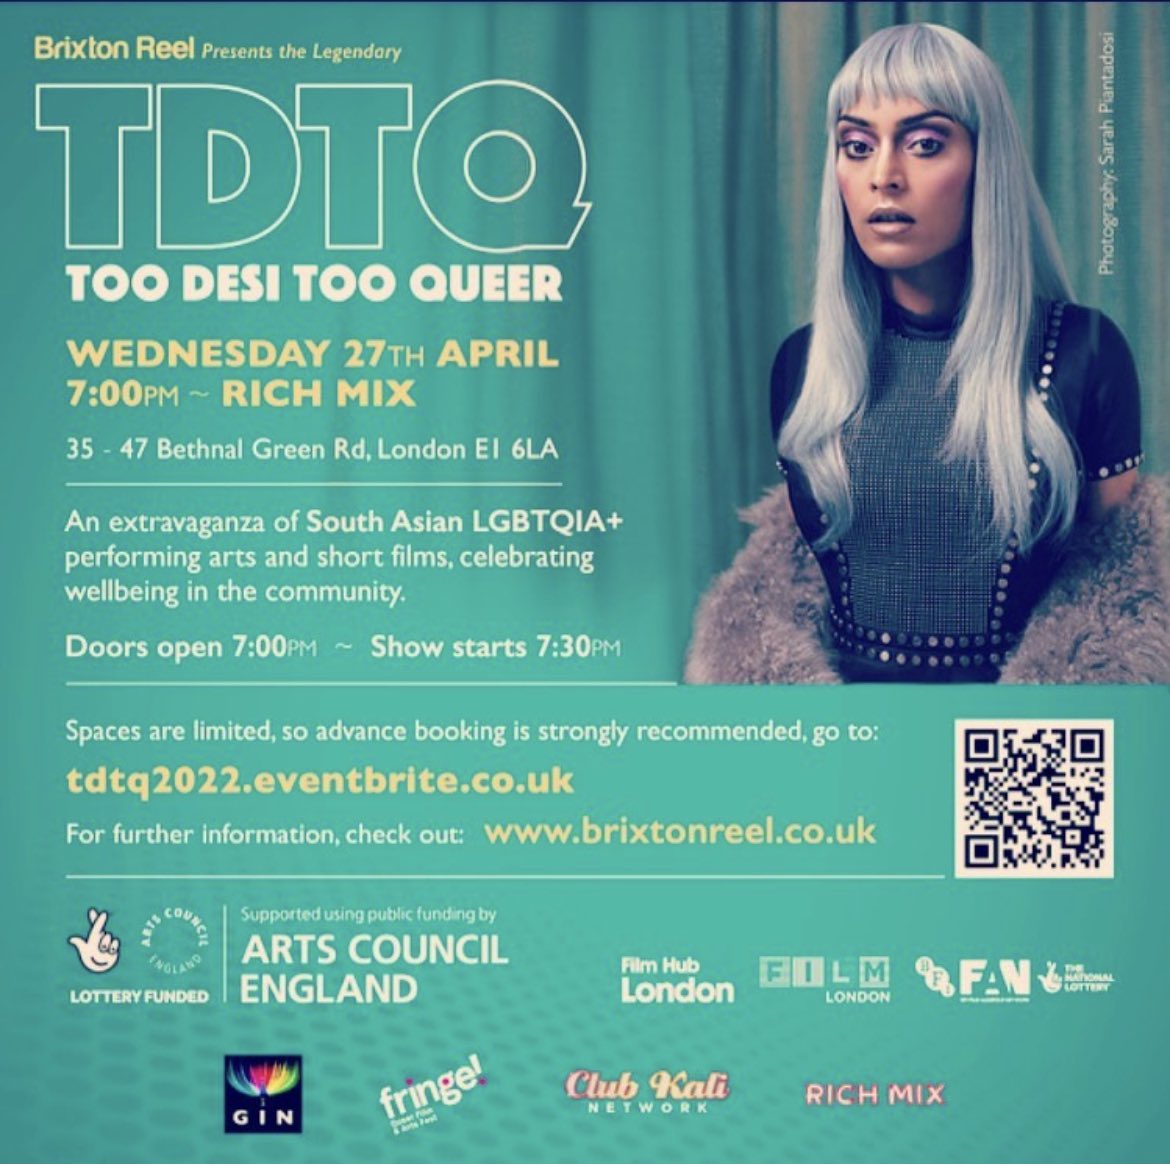 DON’T MISS : Wed 27 April, 7pm @brixtonreel present #toodesitooqueer - an extravaganza of #southasian #lgbtqiaplus performing arts and short films, celebrating mental health and well-being in the community at @RichMixLondon Book at eventbrite.co.uk/e/tdtq-too-des…